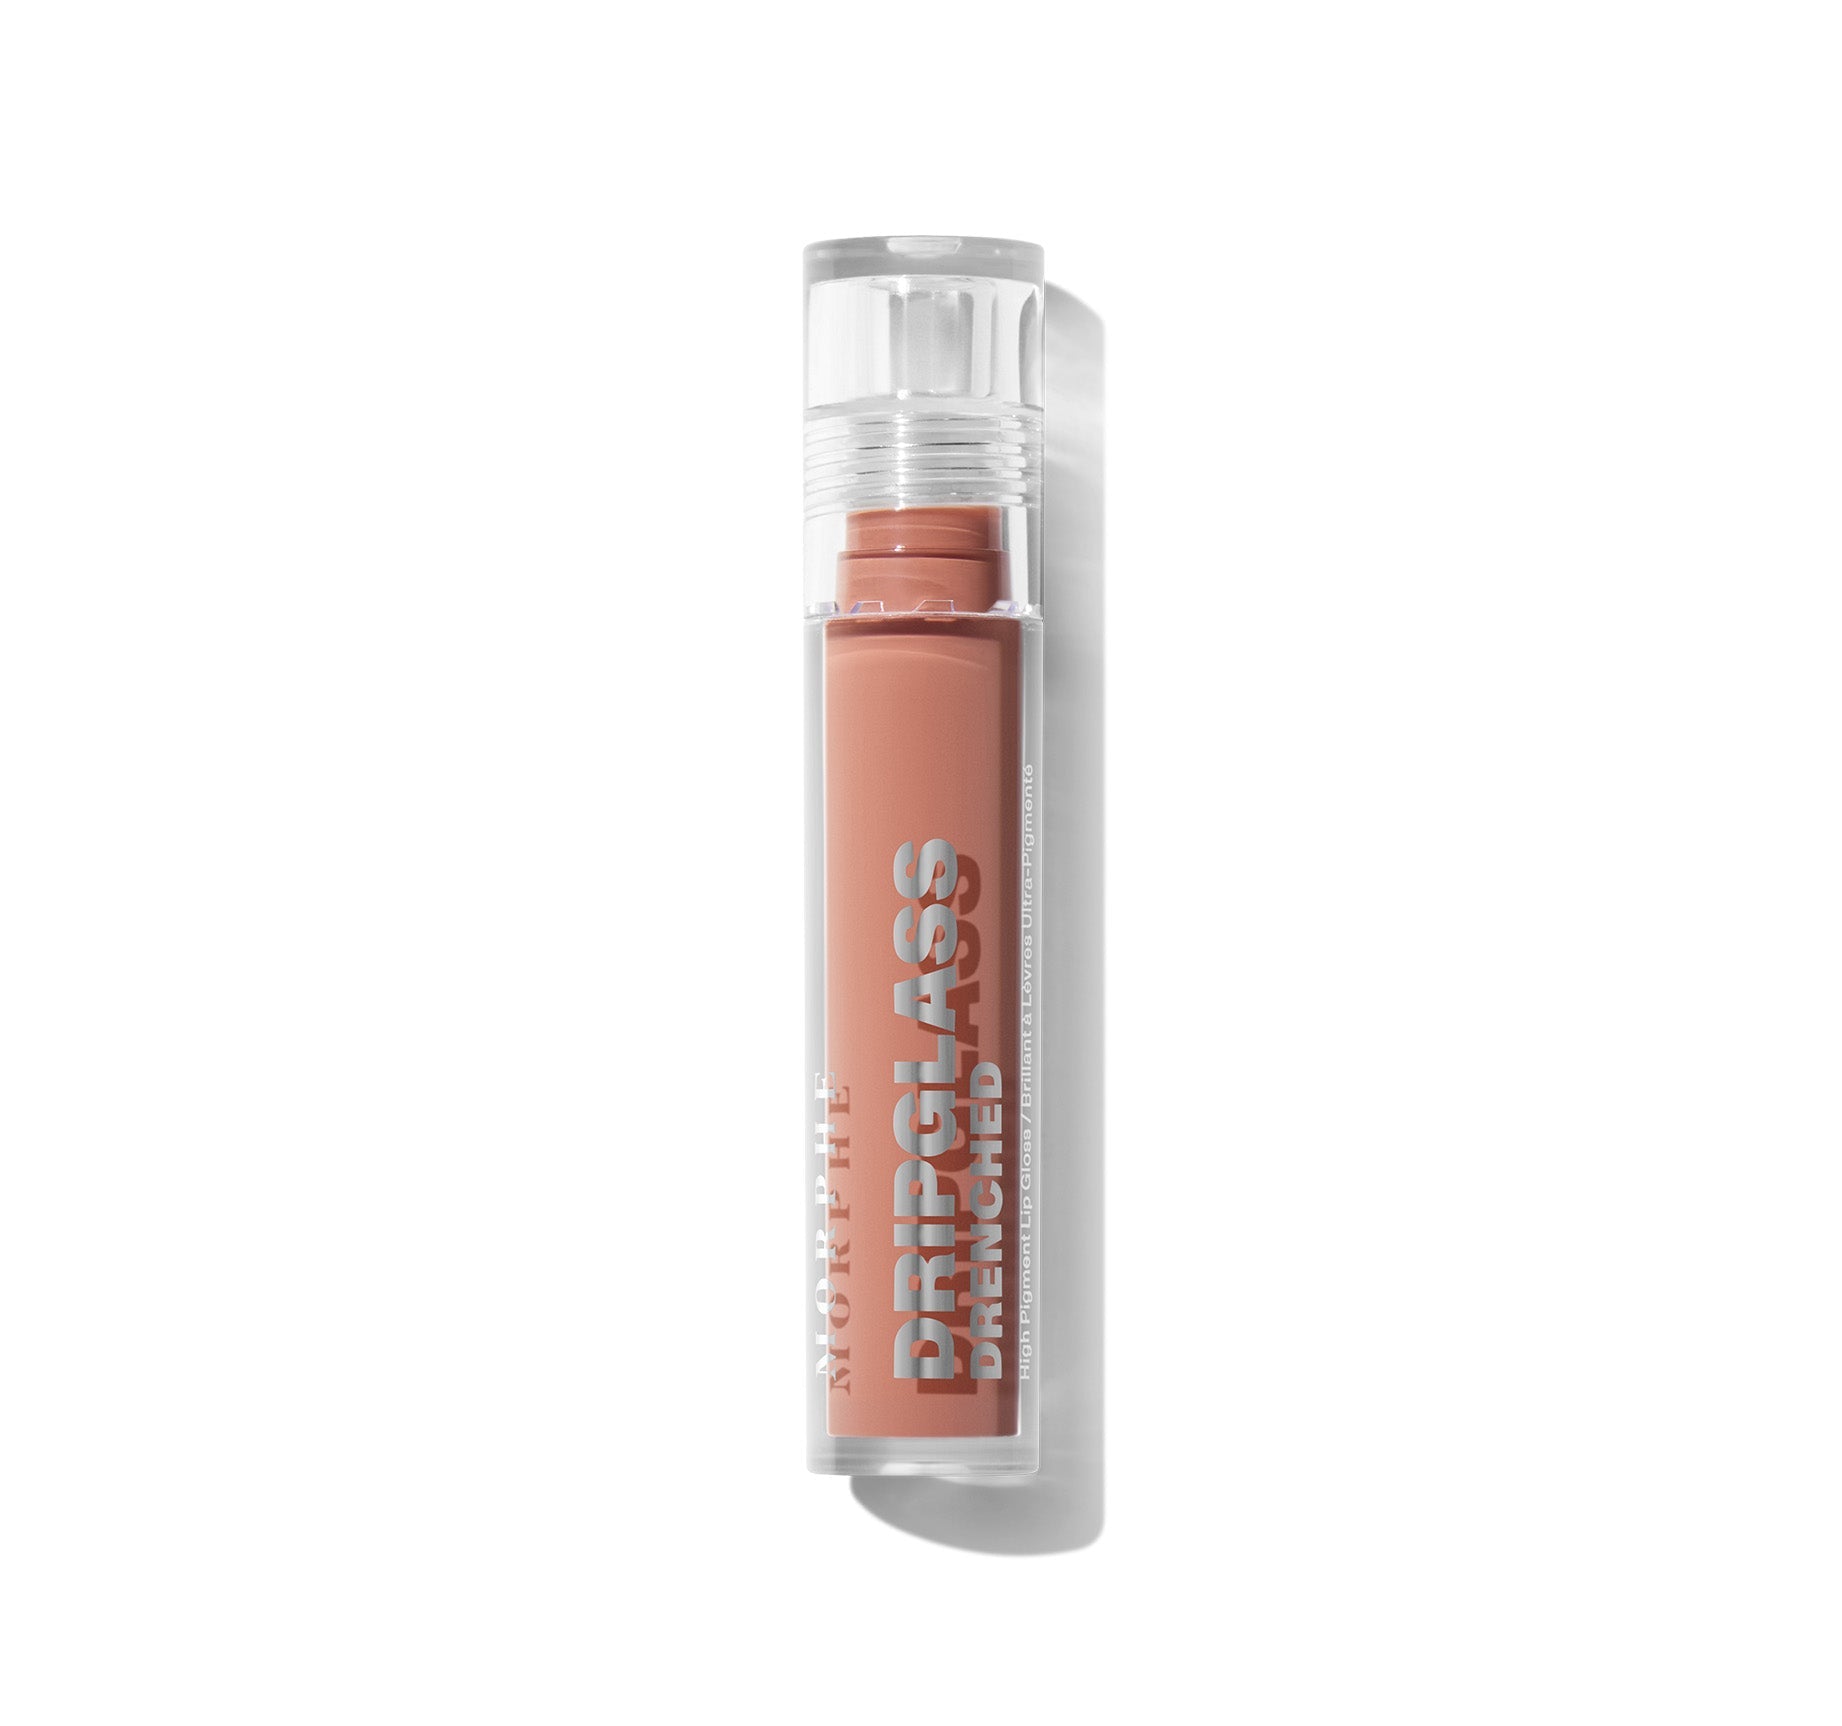 Dripglass Drenched High Pigment Lip Gloss - Naked Dip - Image 5